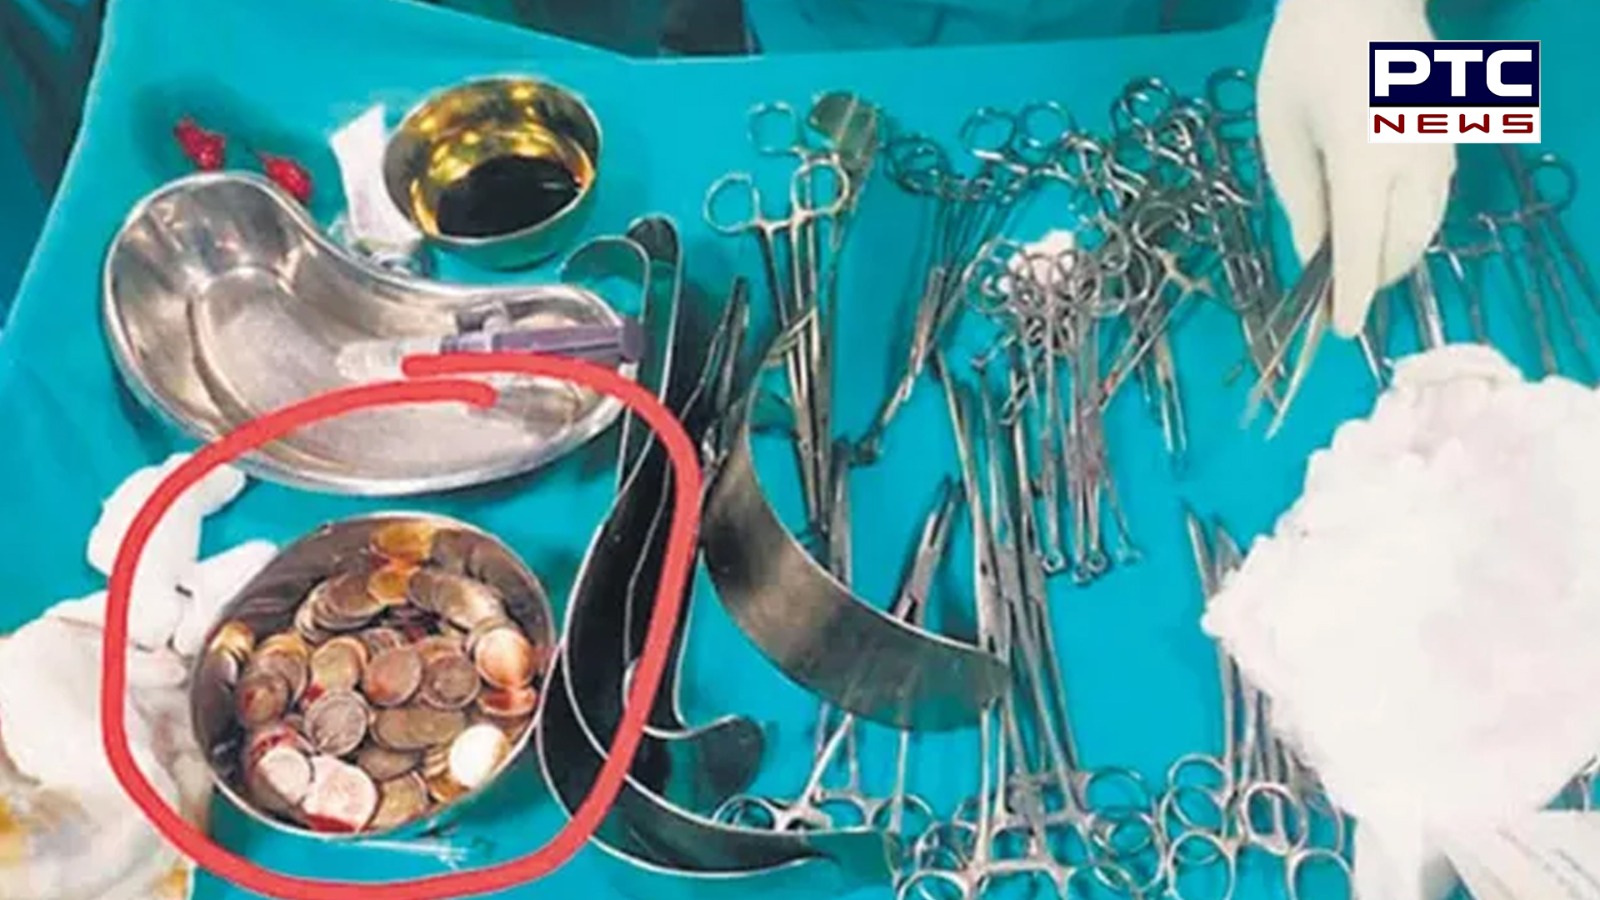 Man swallows 39 coins, 37 magnets which helped him in body-building